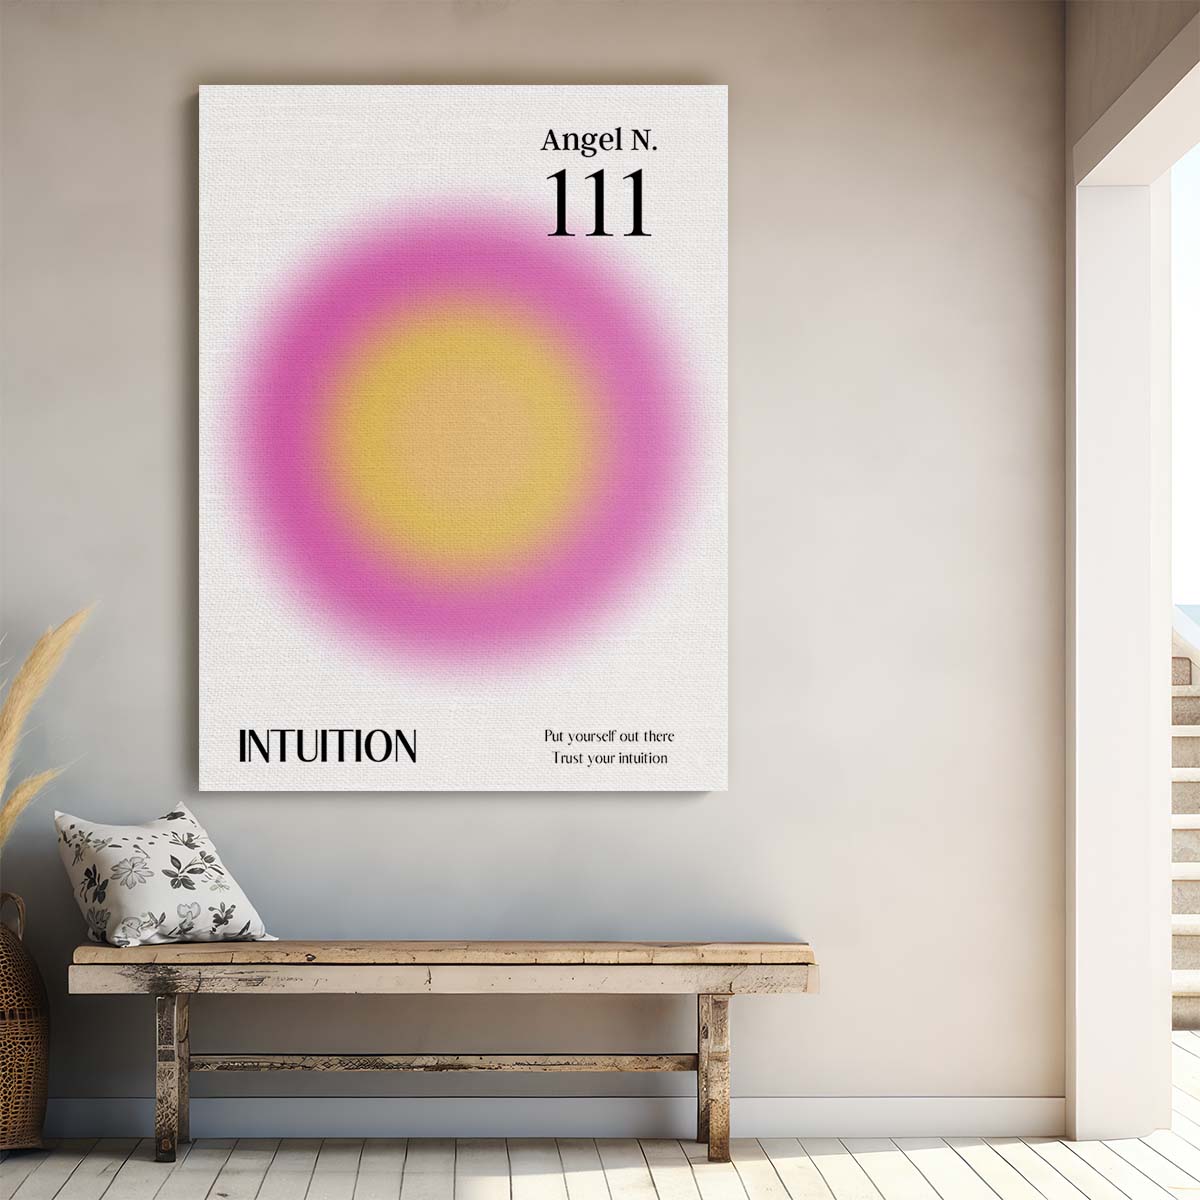 Angel Number 111 Motivational Illustration, Law of Attraction Poster by Luxuriance Designs, made in USA